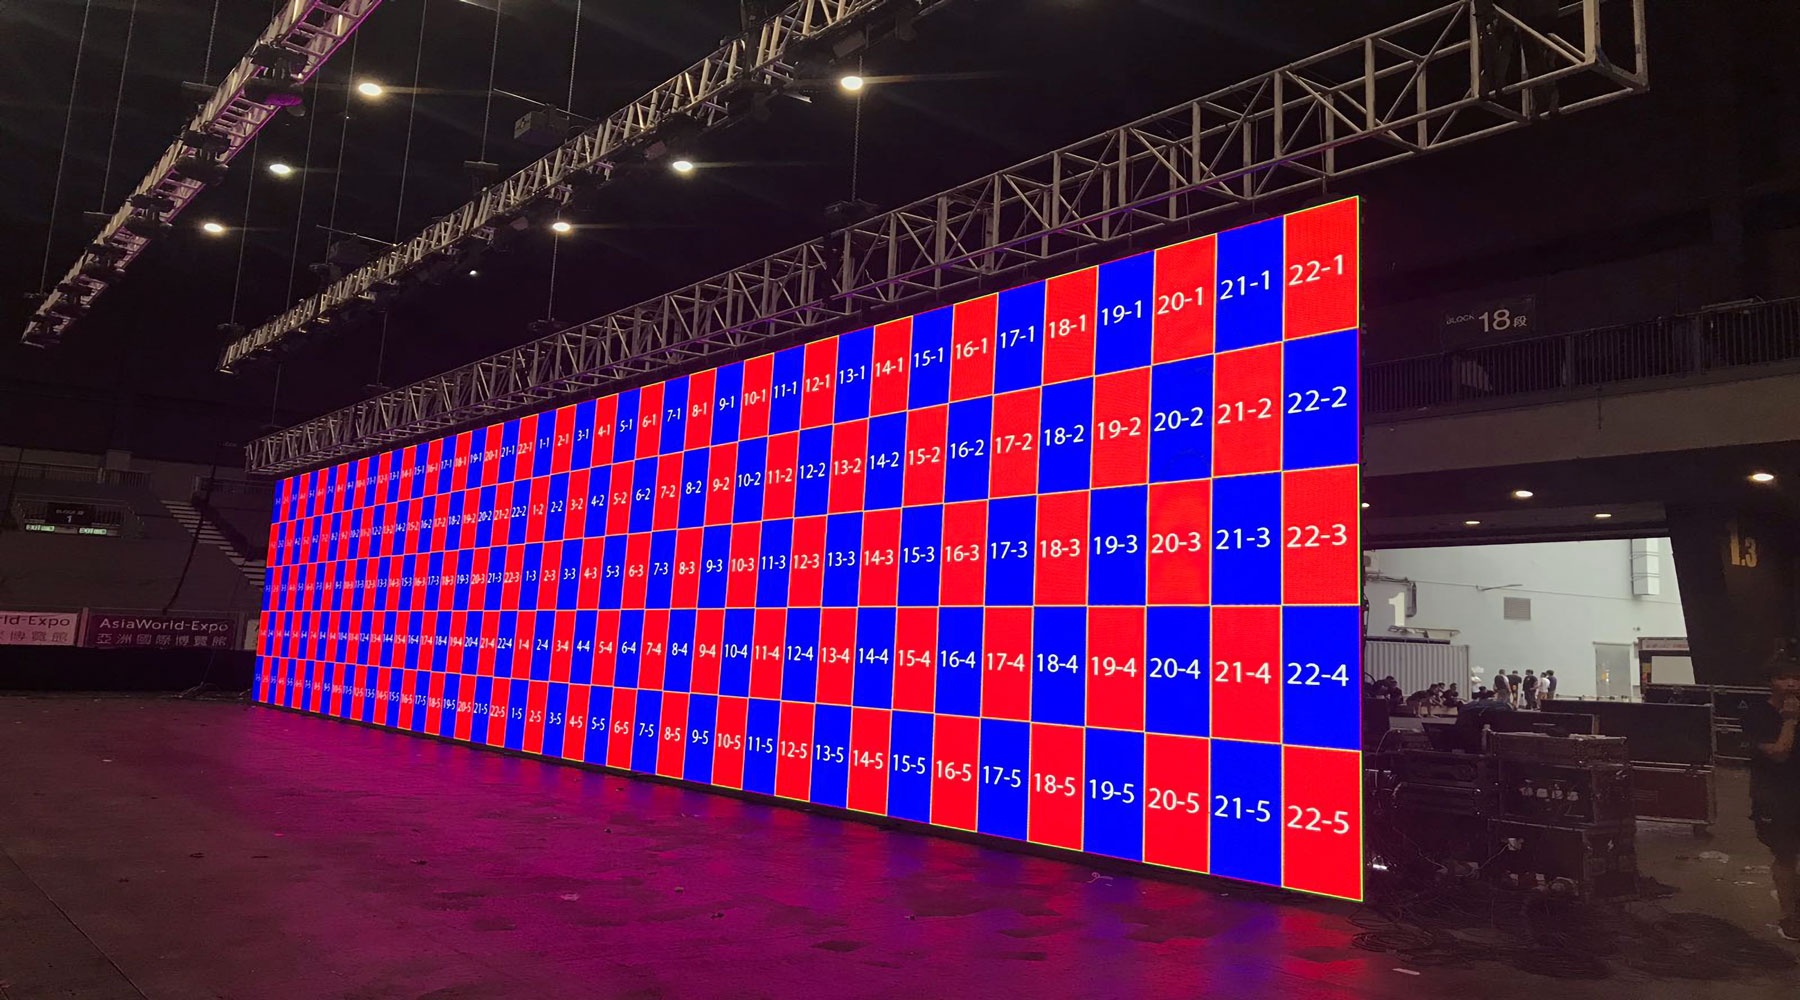 We provide top-of-the-line video Wall equipment, available for rental to suit your event.  Rental service may include set up and dismantle, on-site support at your events such as annual dinners, conferences, performances, parties.